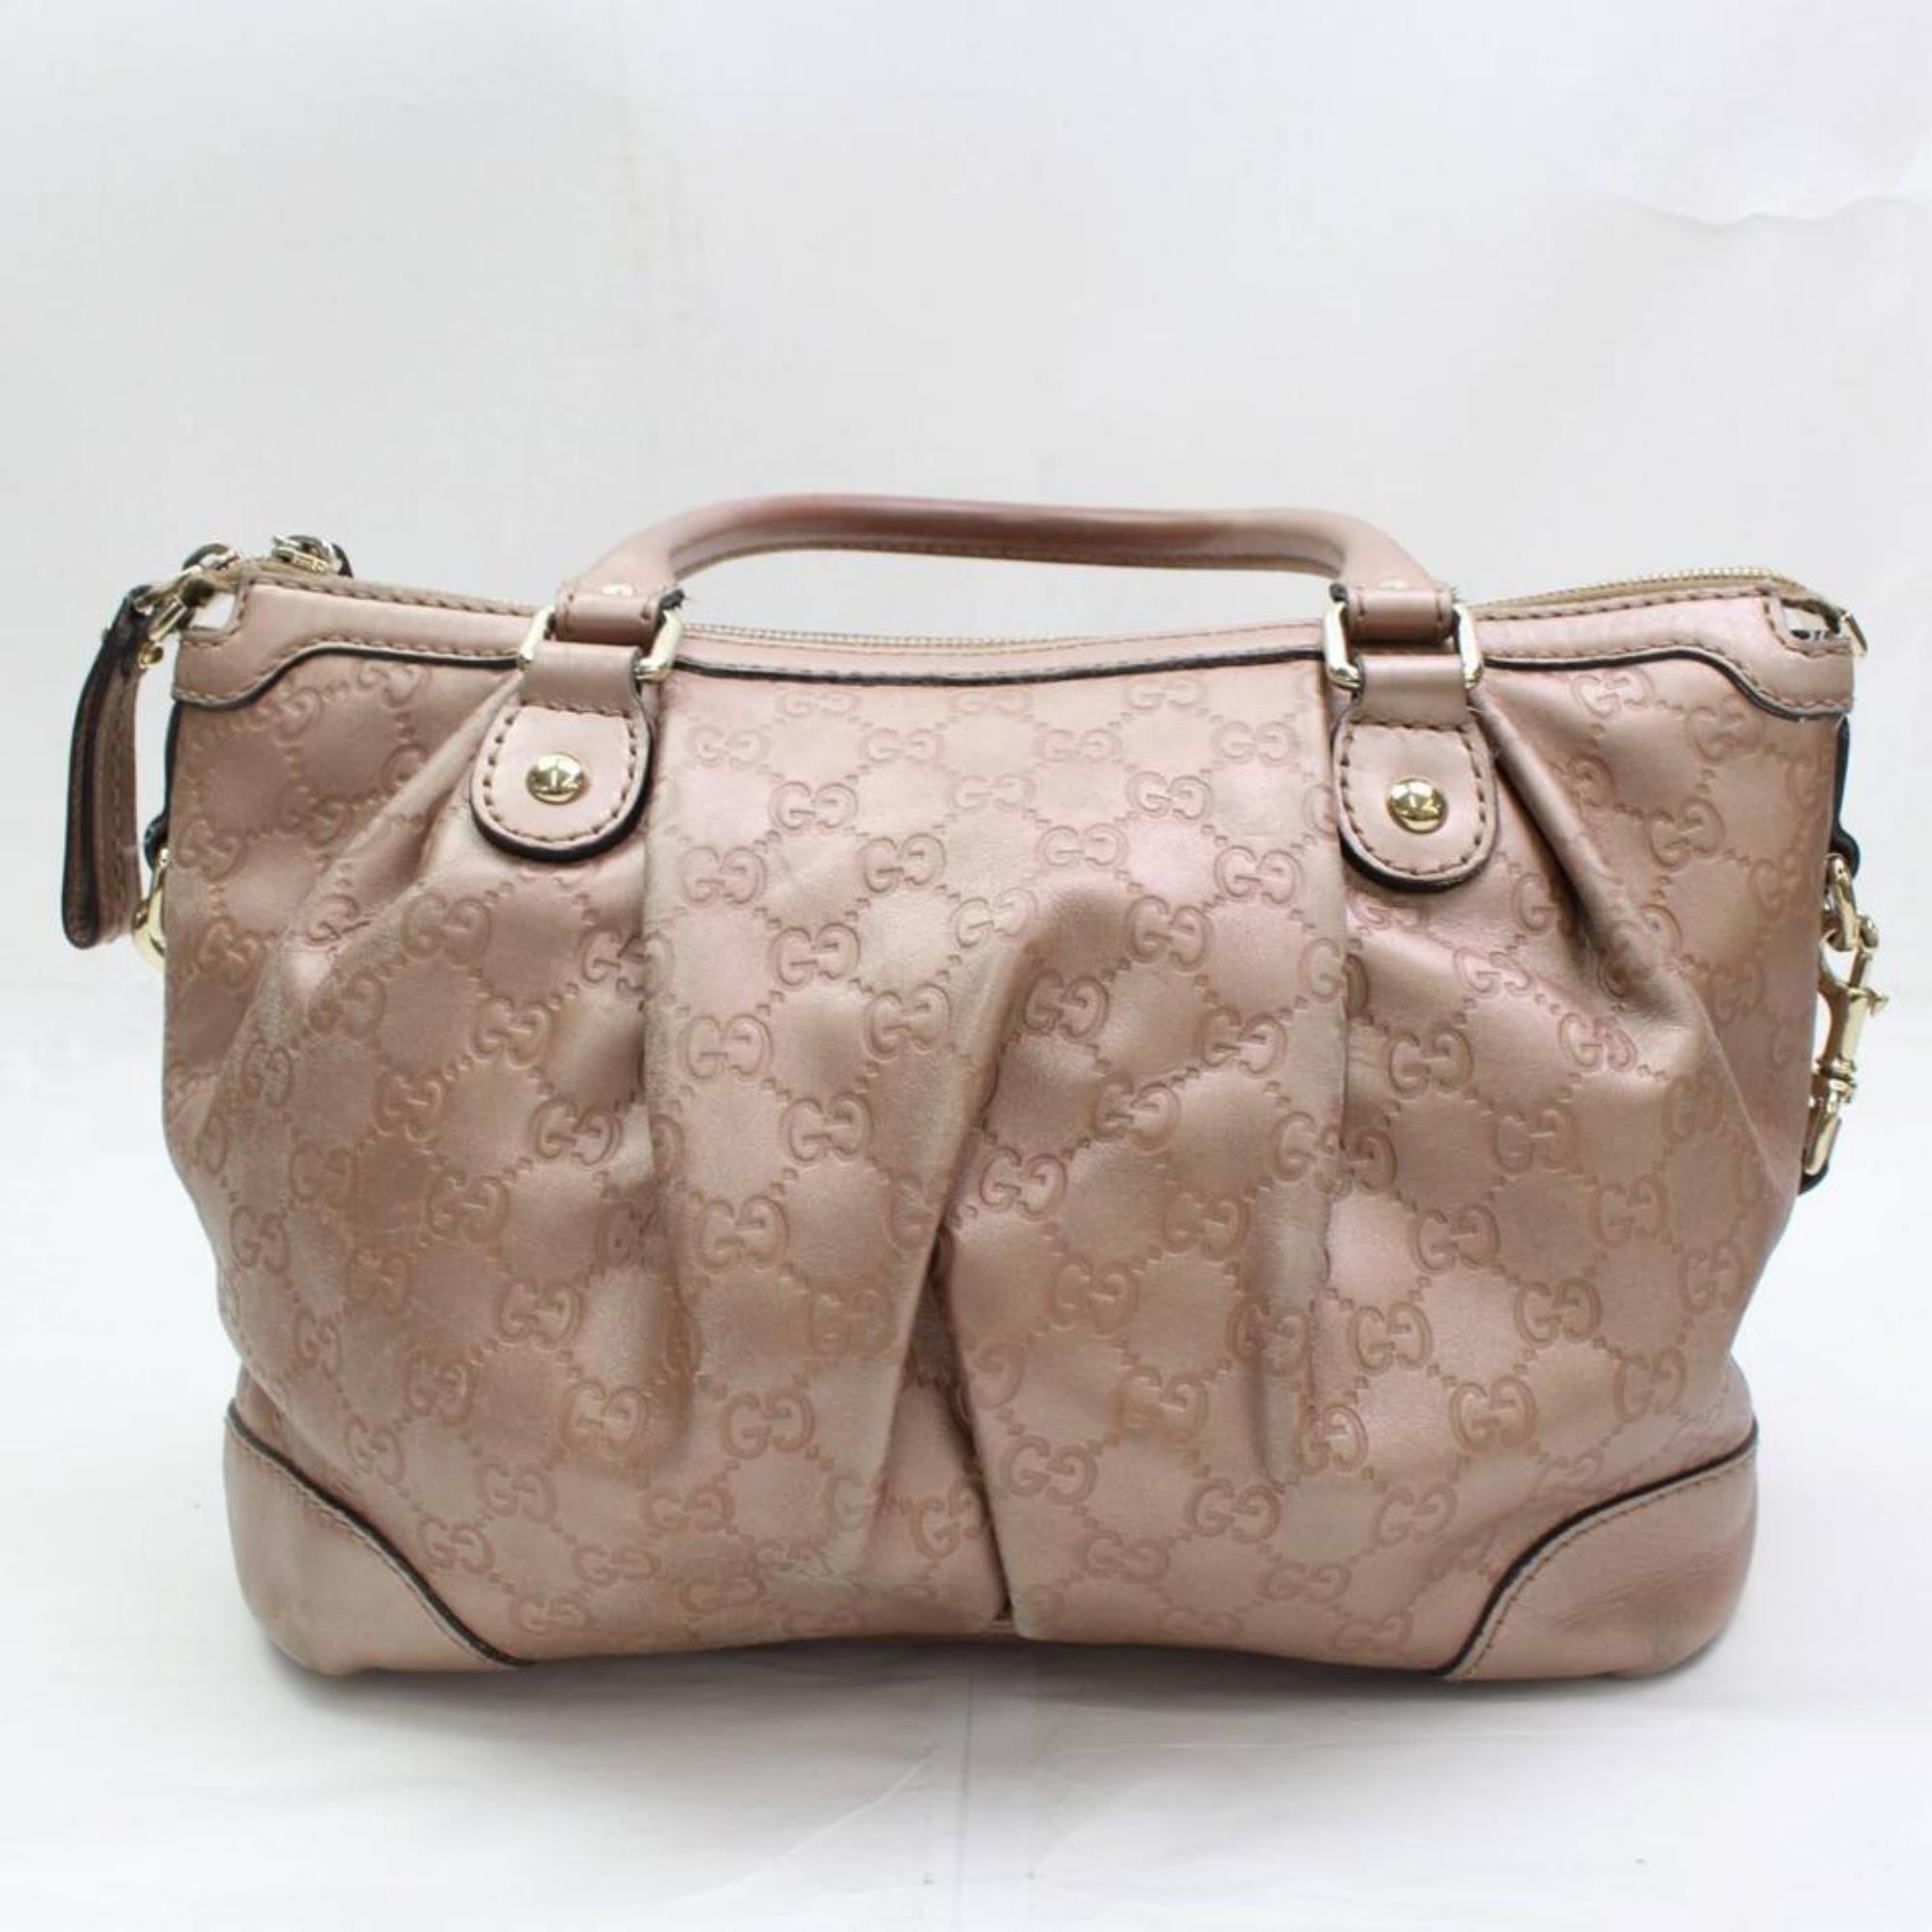 Gucci Sukey Guccissima 2way 867426 Pink Leather Shoulder Bag For Sale 1